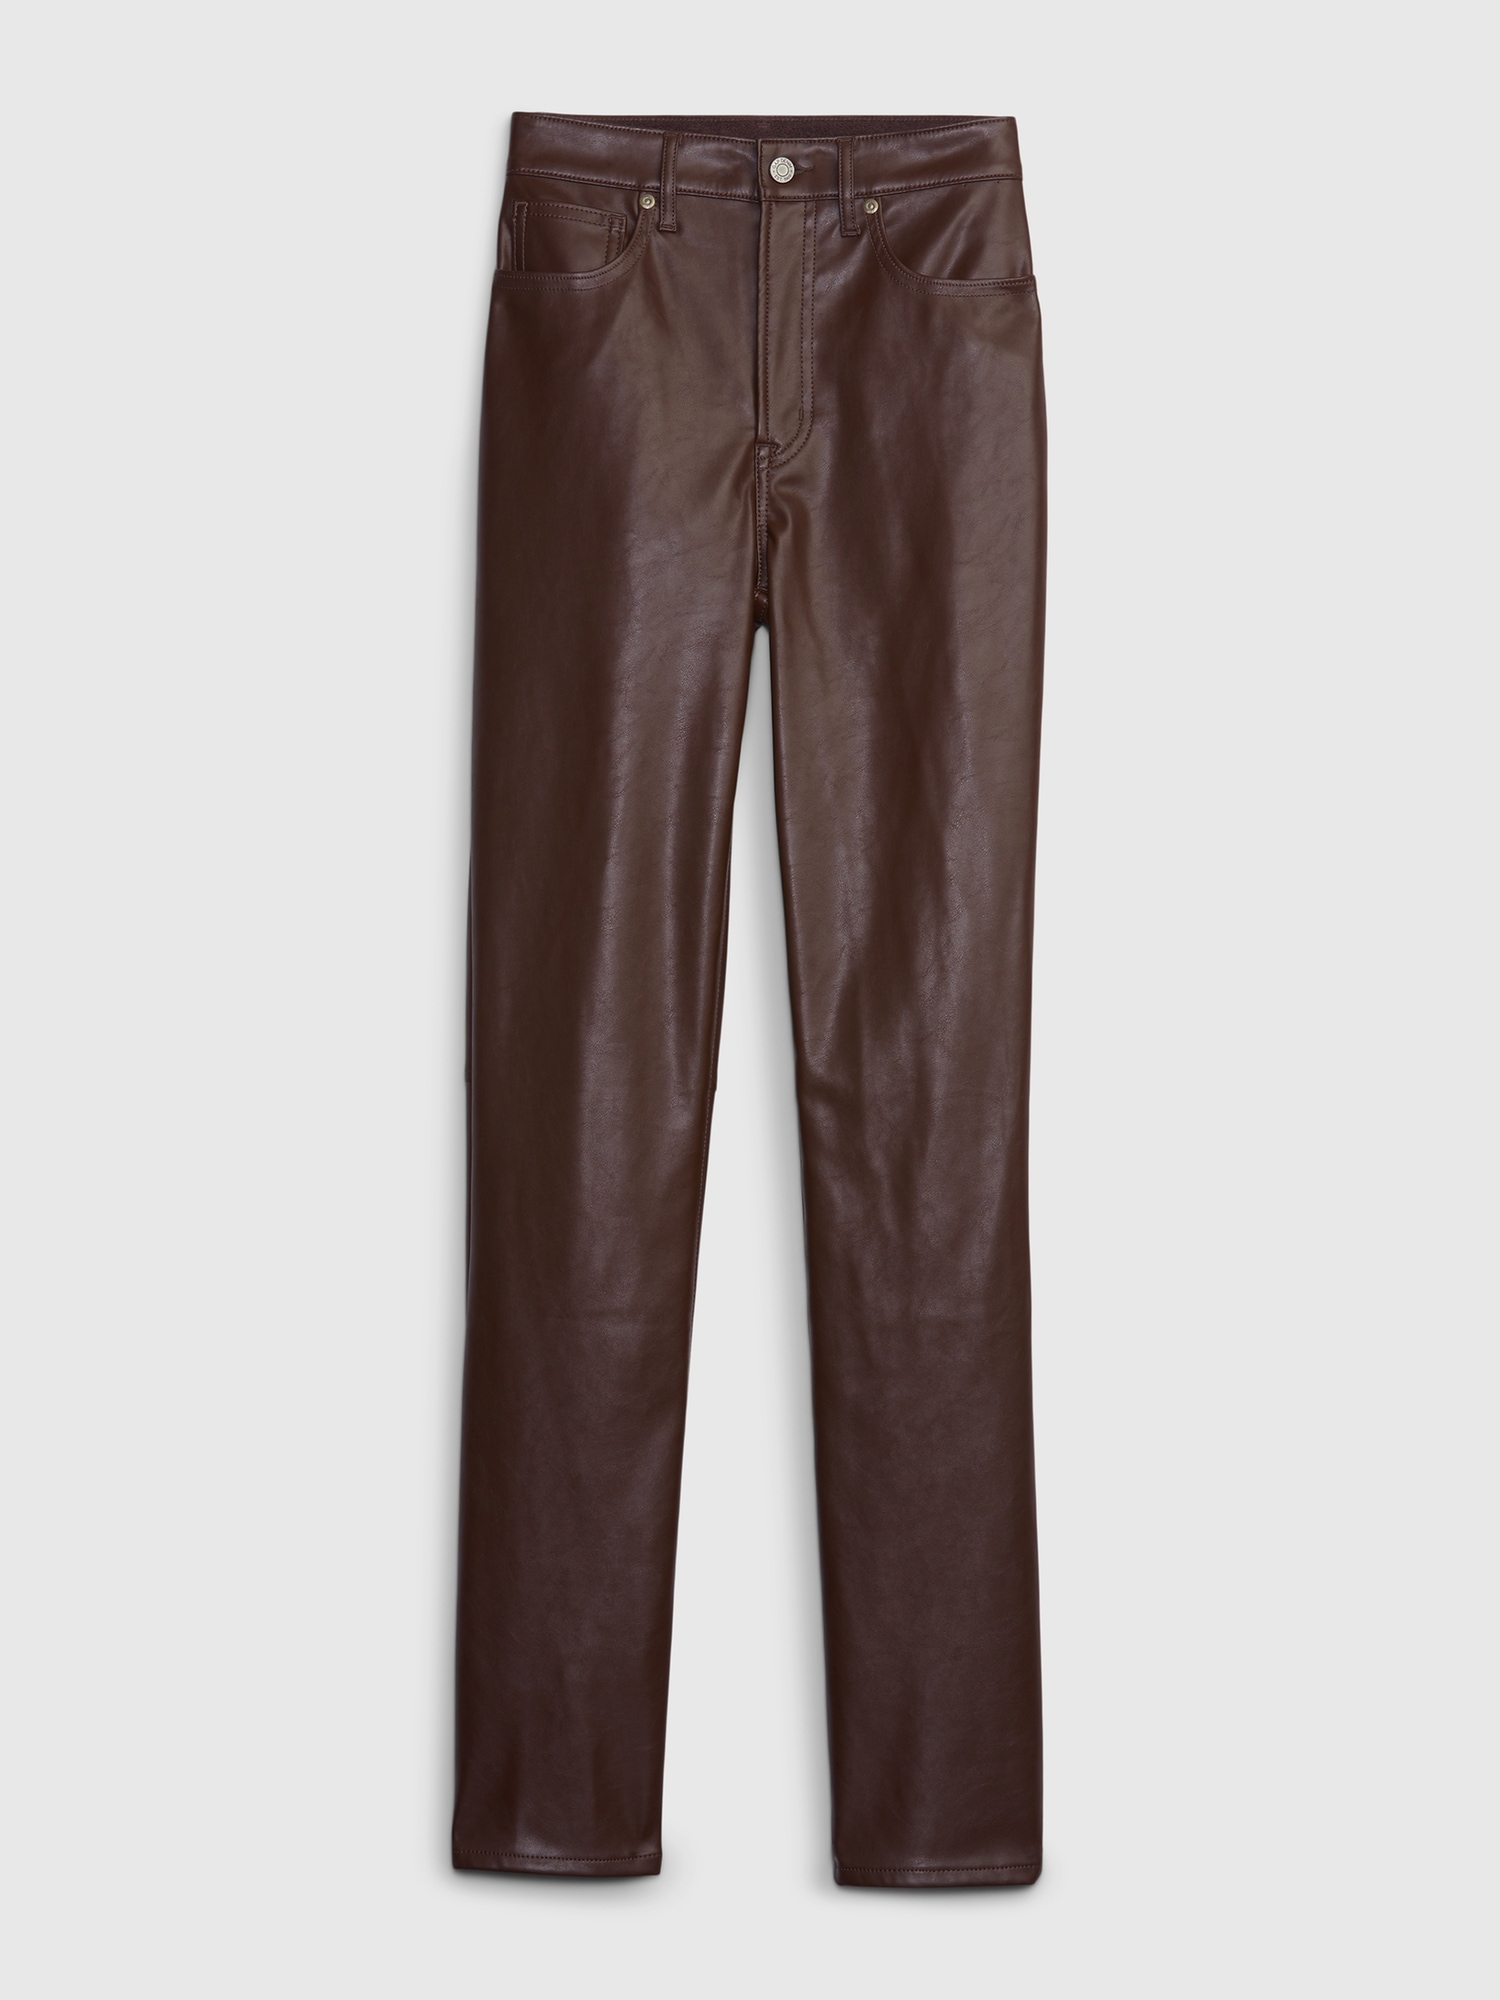 Gap Button Fly Leather Pants